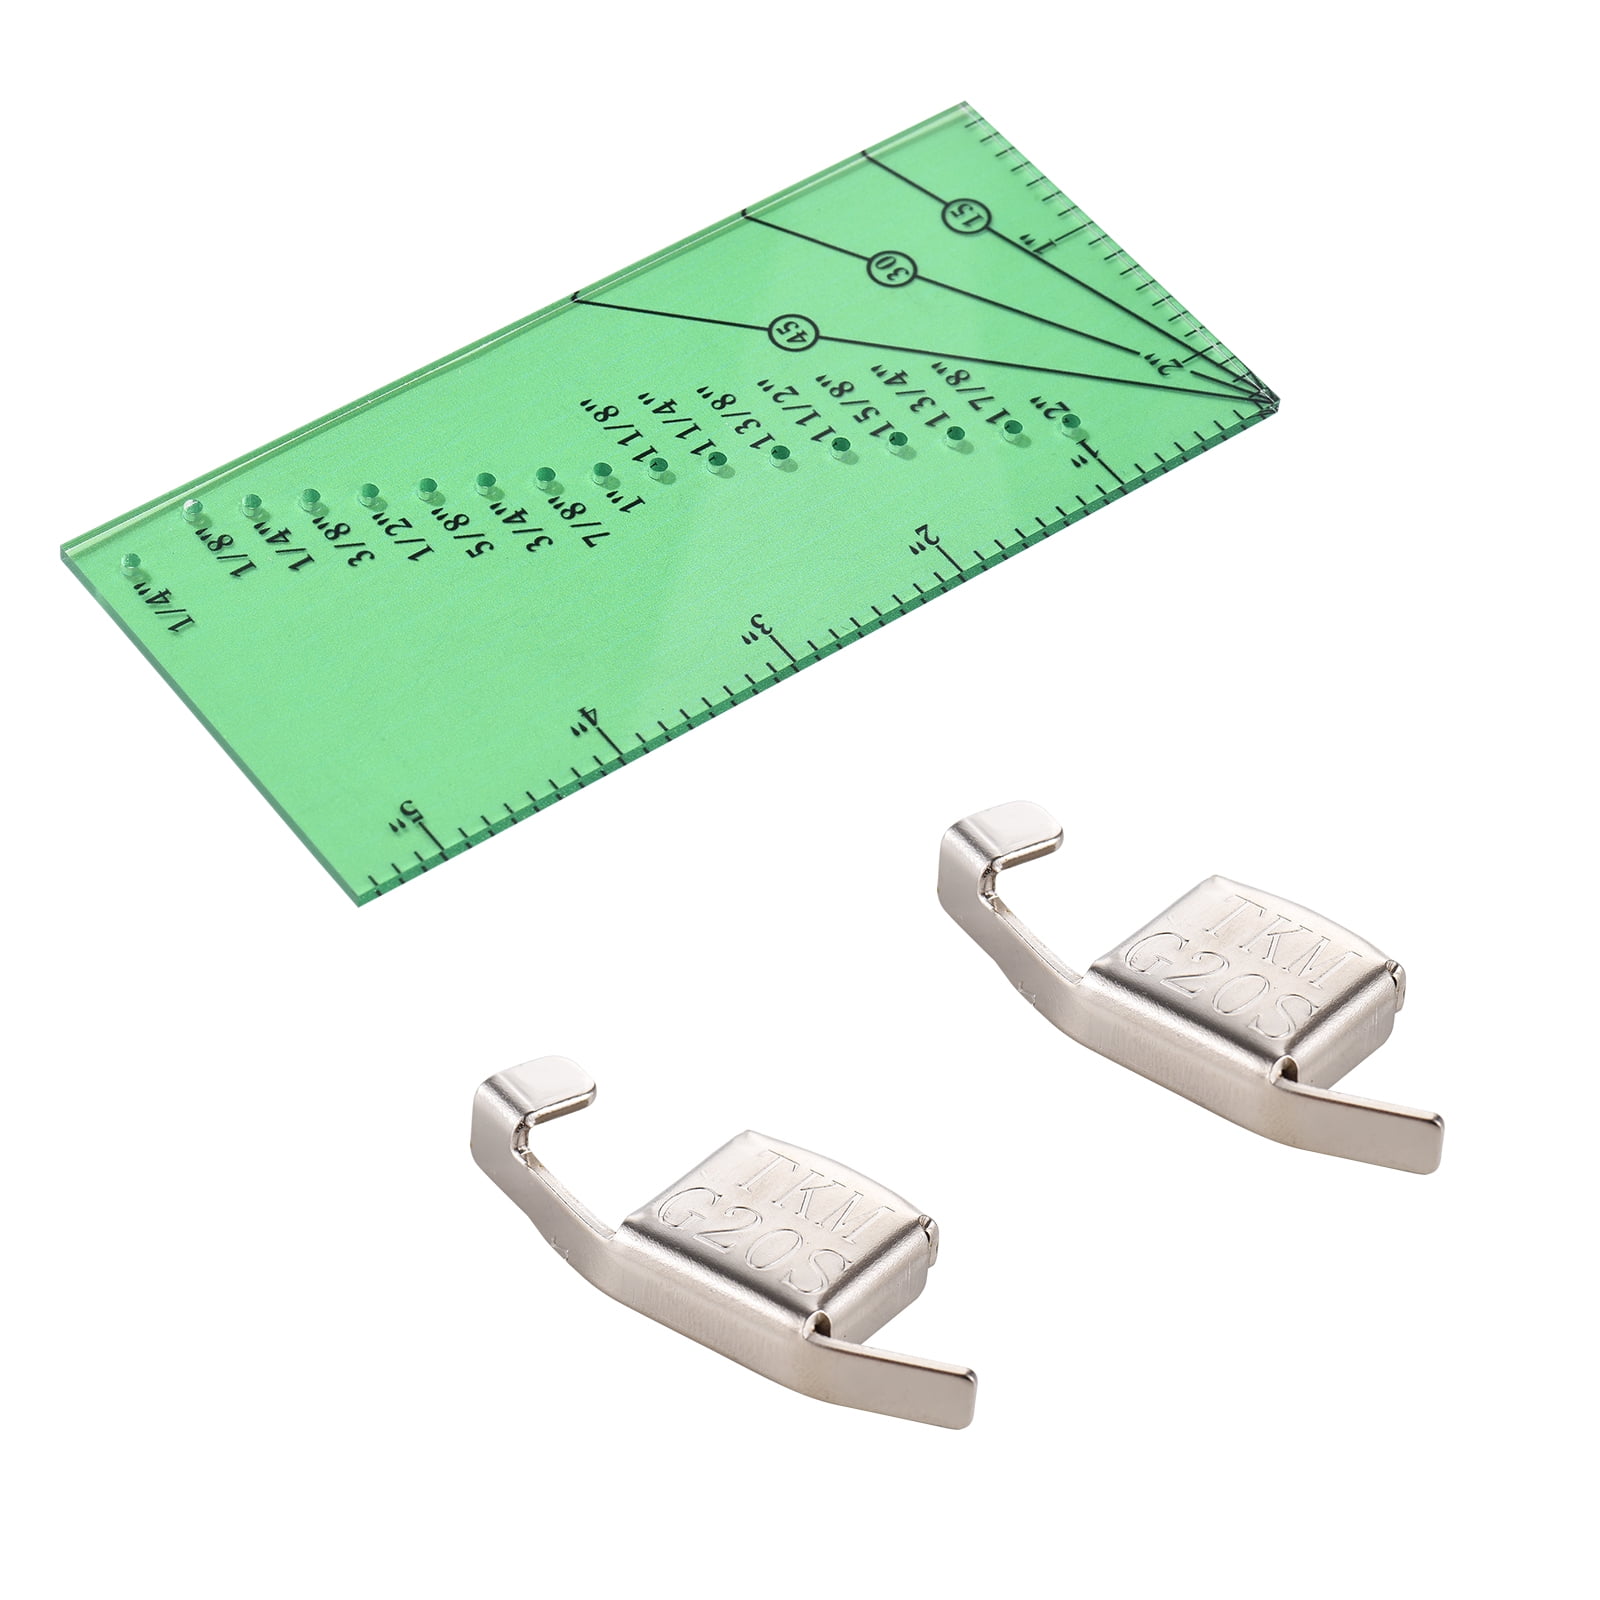  4 Pieces Seam Guide Ruler Set Include 2 Quilting Seam Guide  Ruler Sew Seam Allowance Rulers Perforated Seam Gauge for 1/8 to 2 Inch  Straight Line Hems and 2 Magnetic Sewing